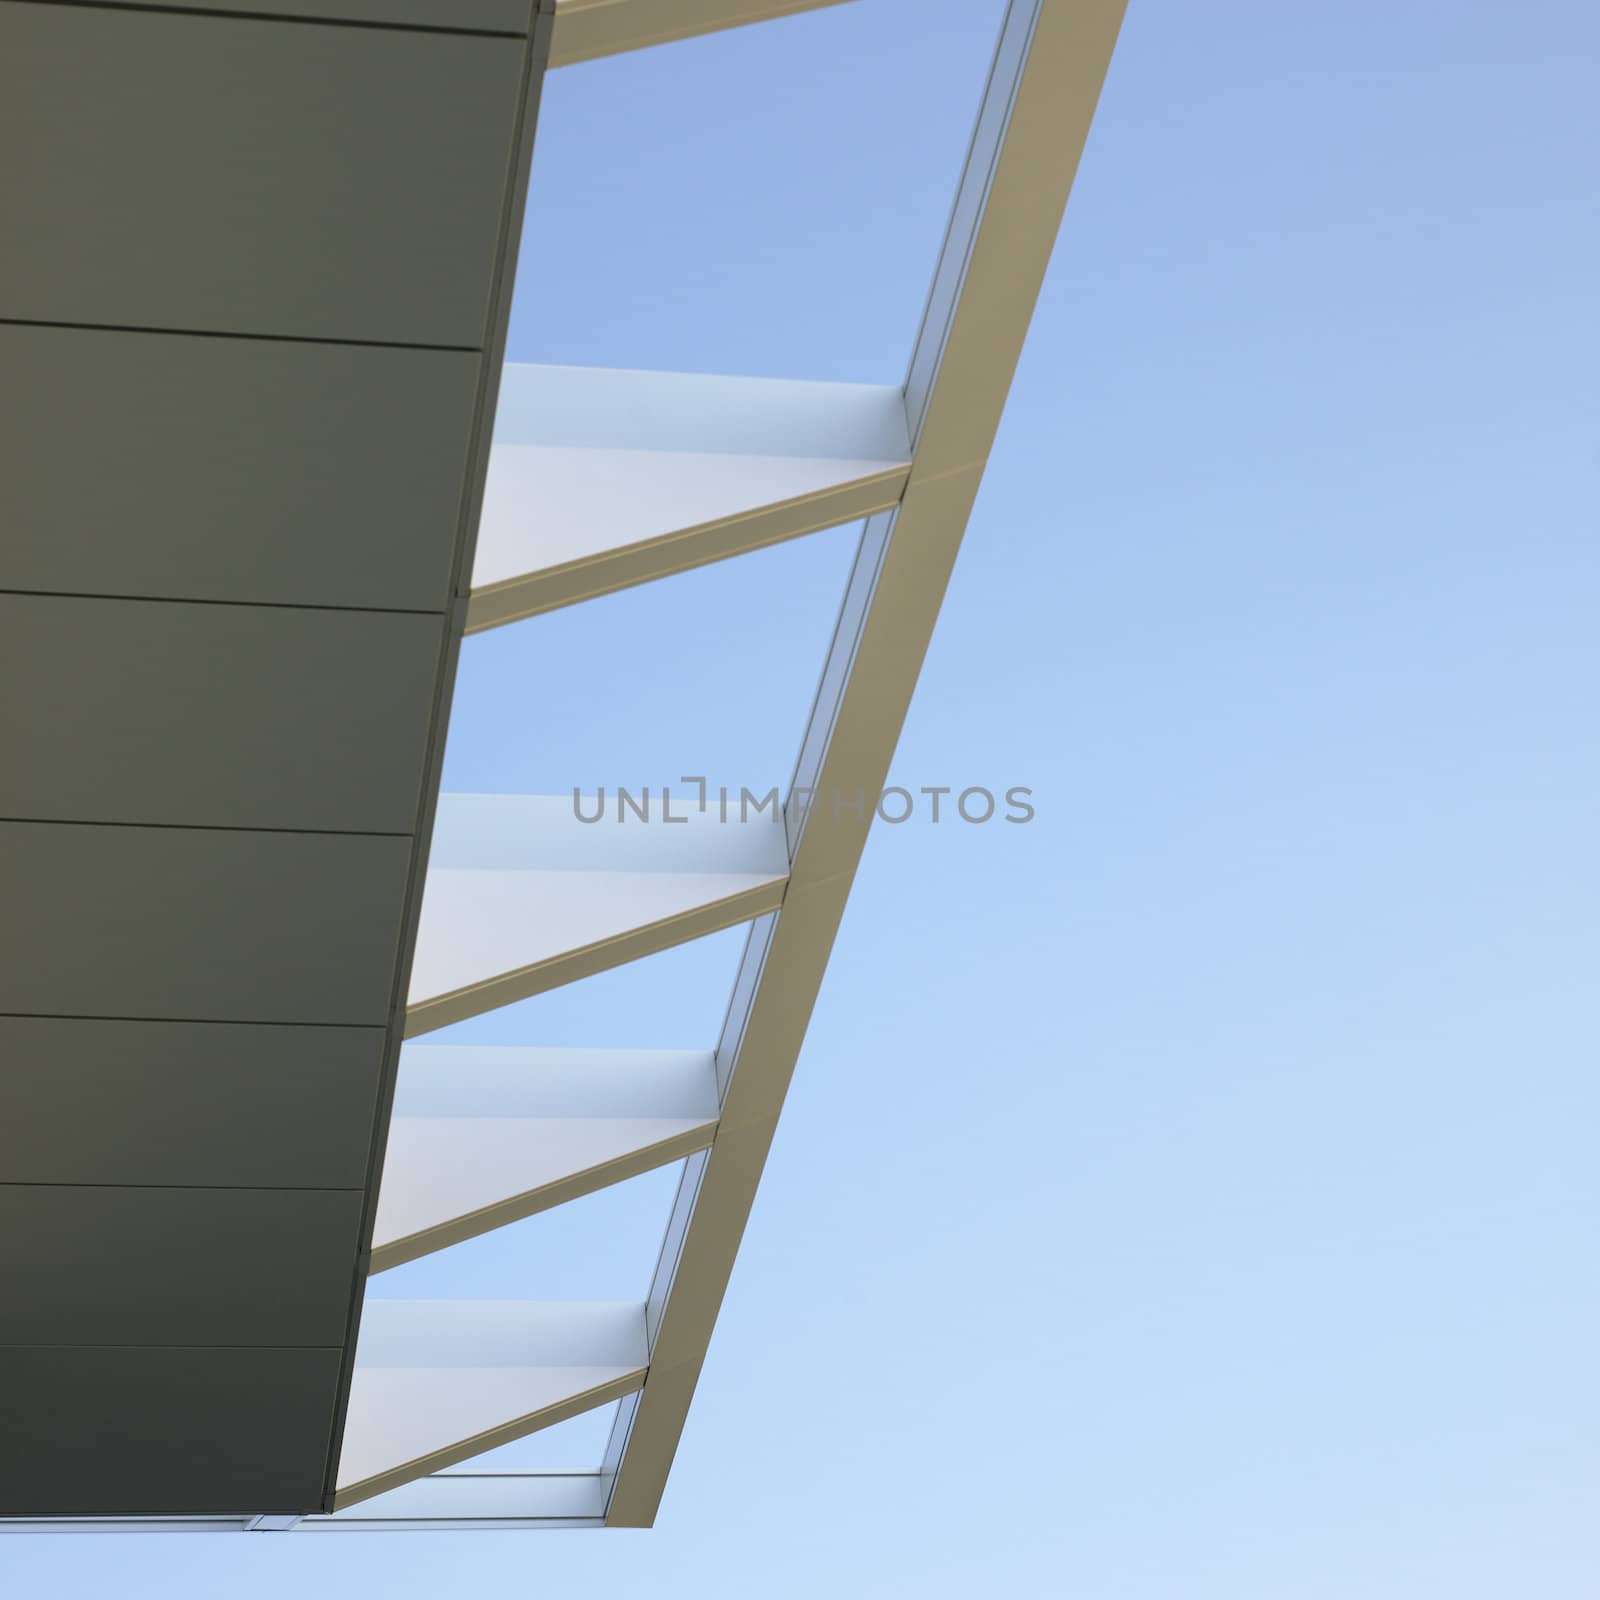 Modern architectural building awning against blue sky